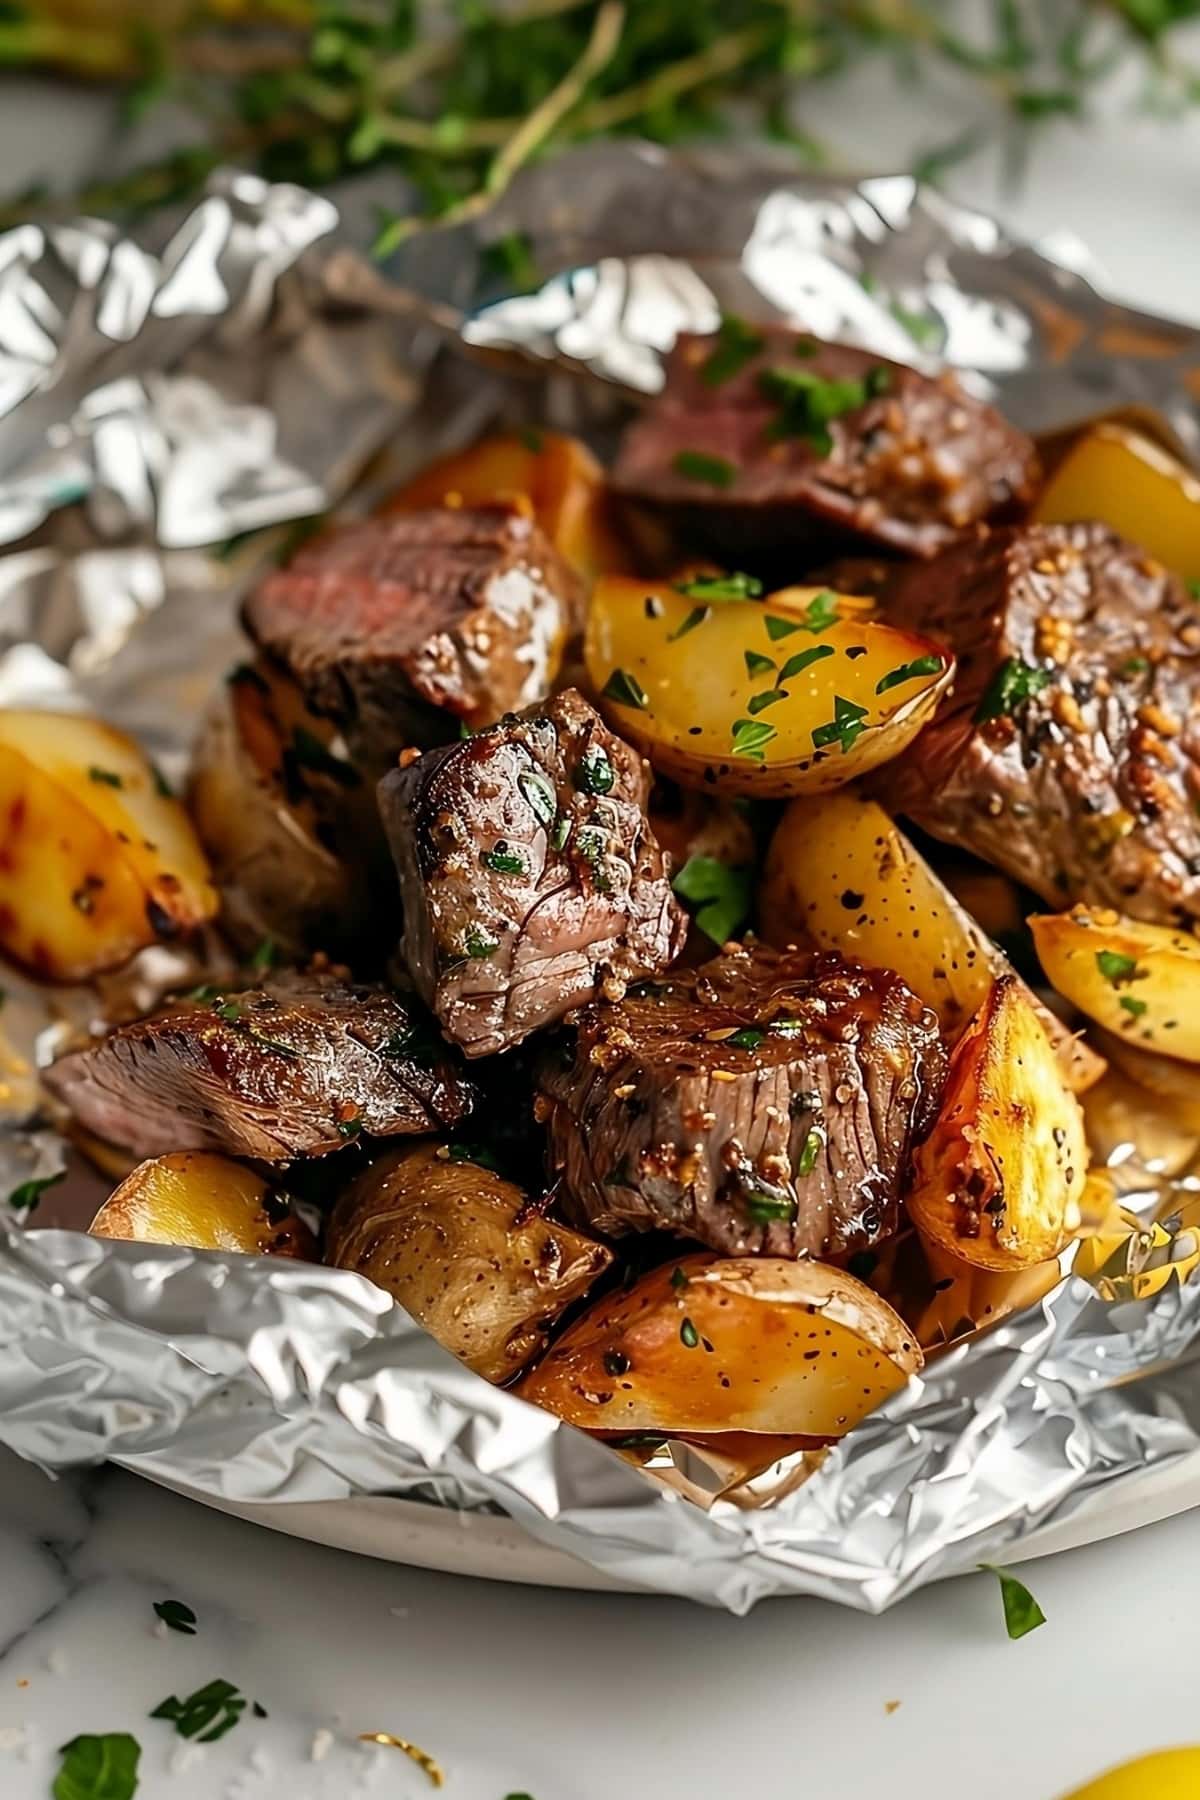 Grilled steak and potatoes with thyme in aluminum foil.